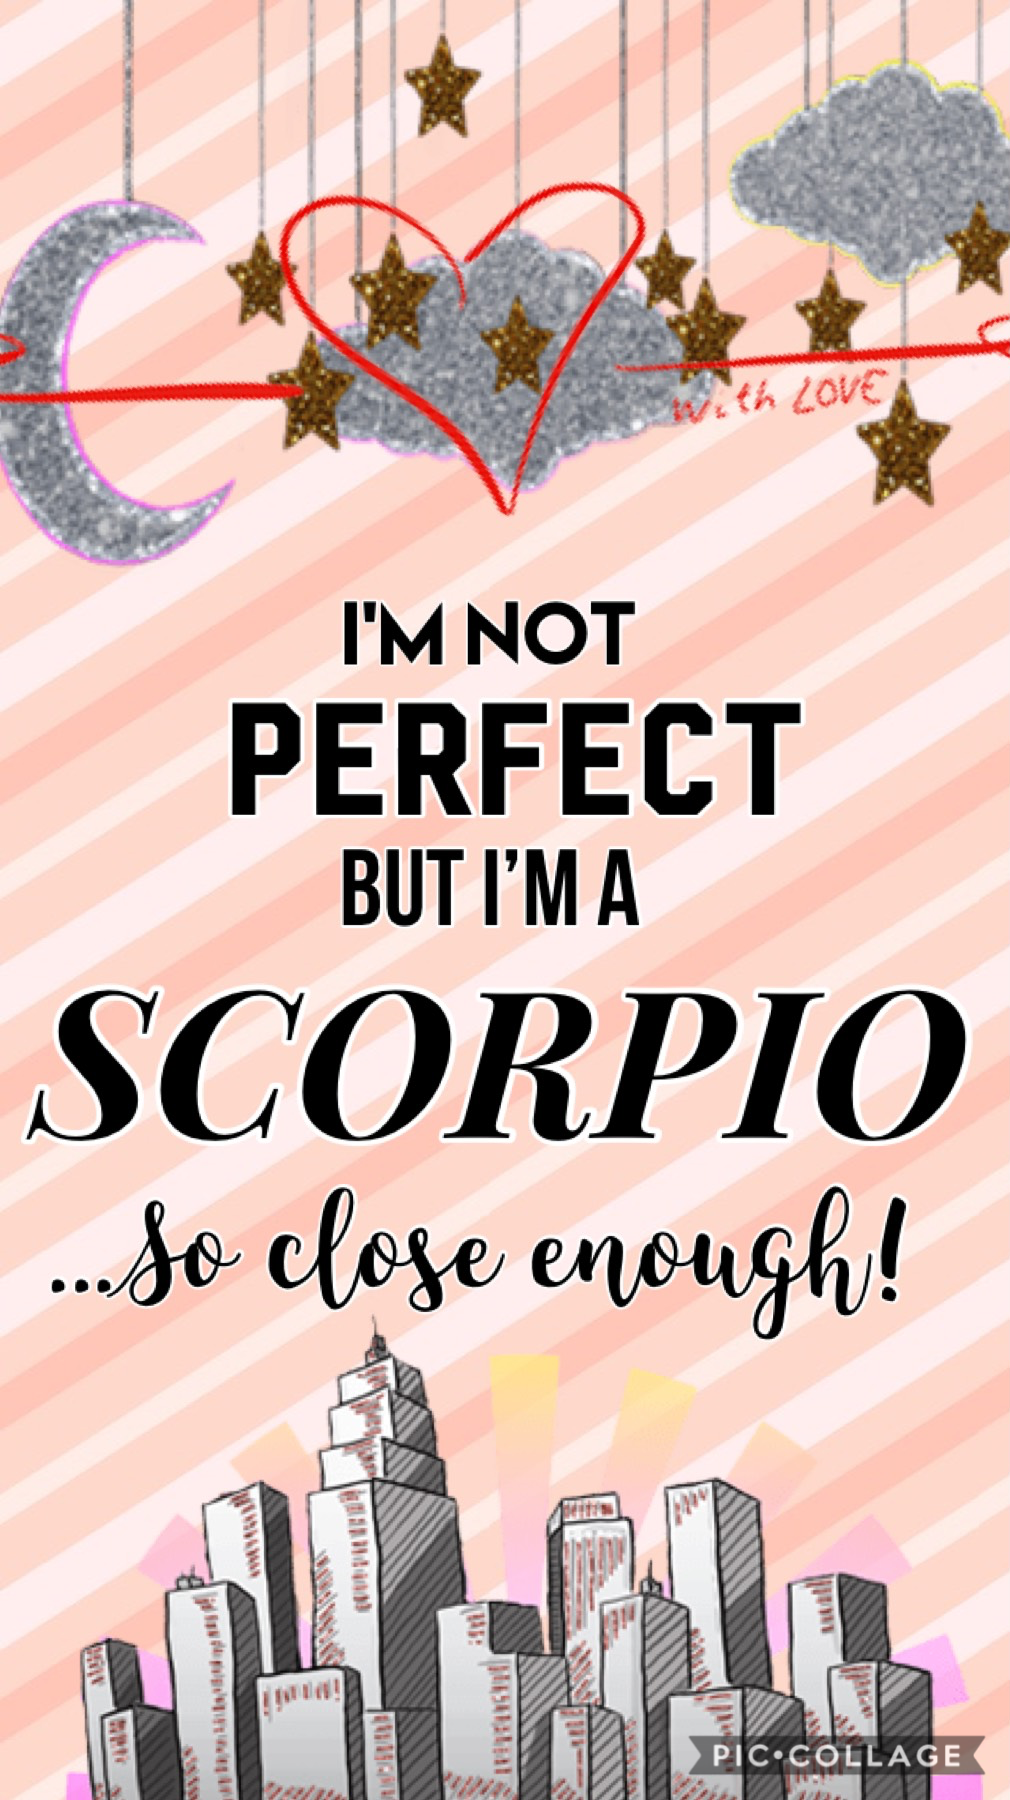 Like if you are a scorpio